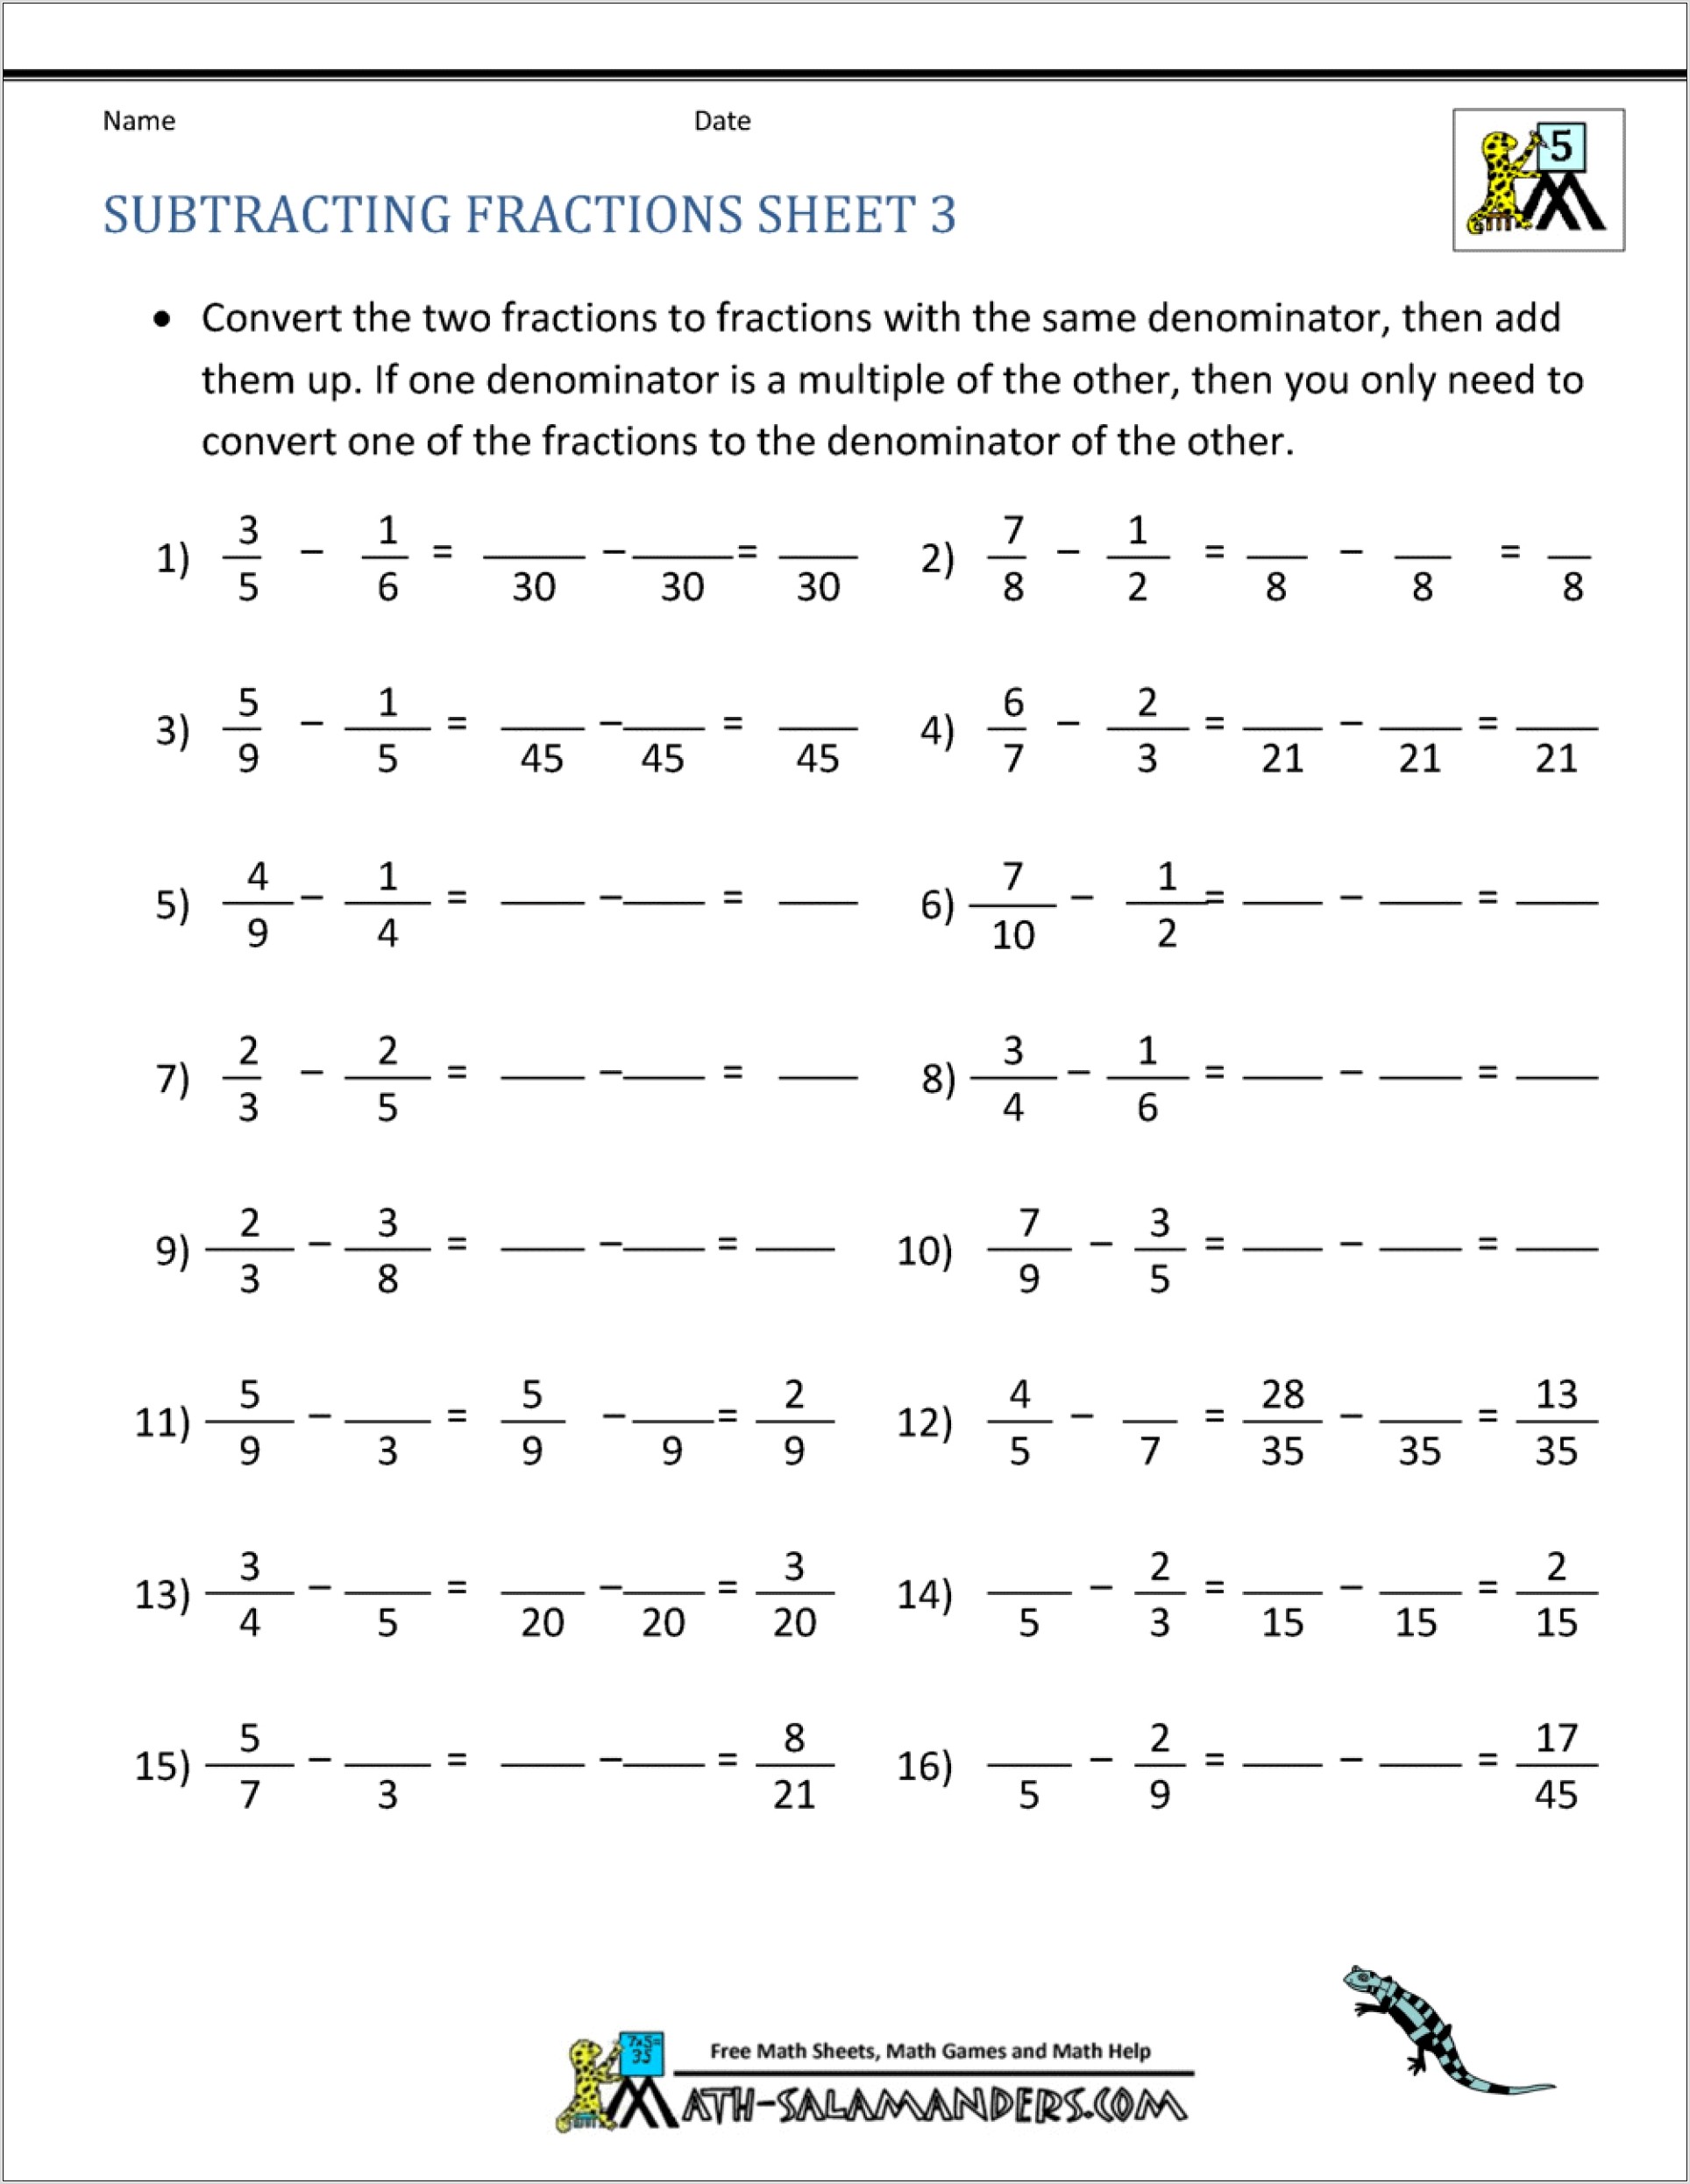 Worksheet Subtracting Fractions From Whole Numbers